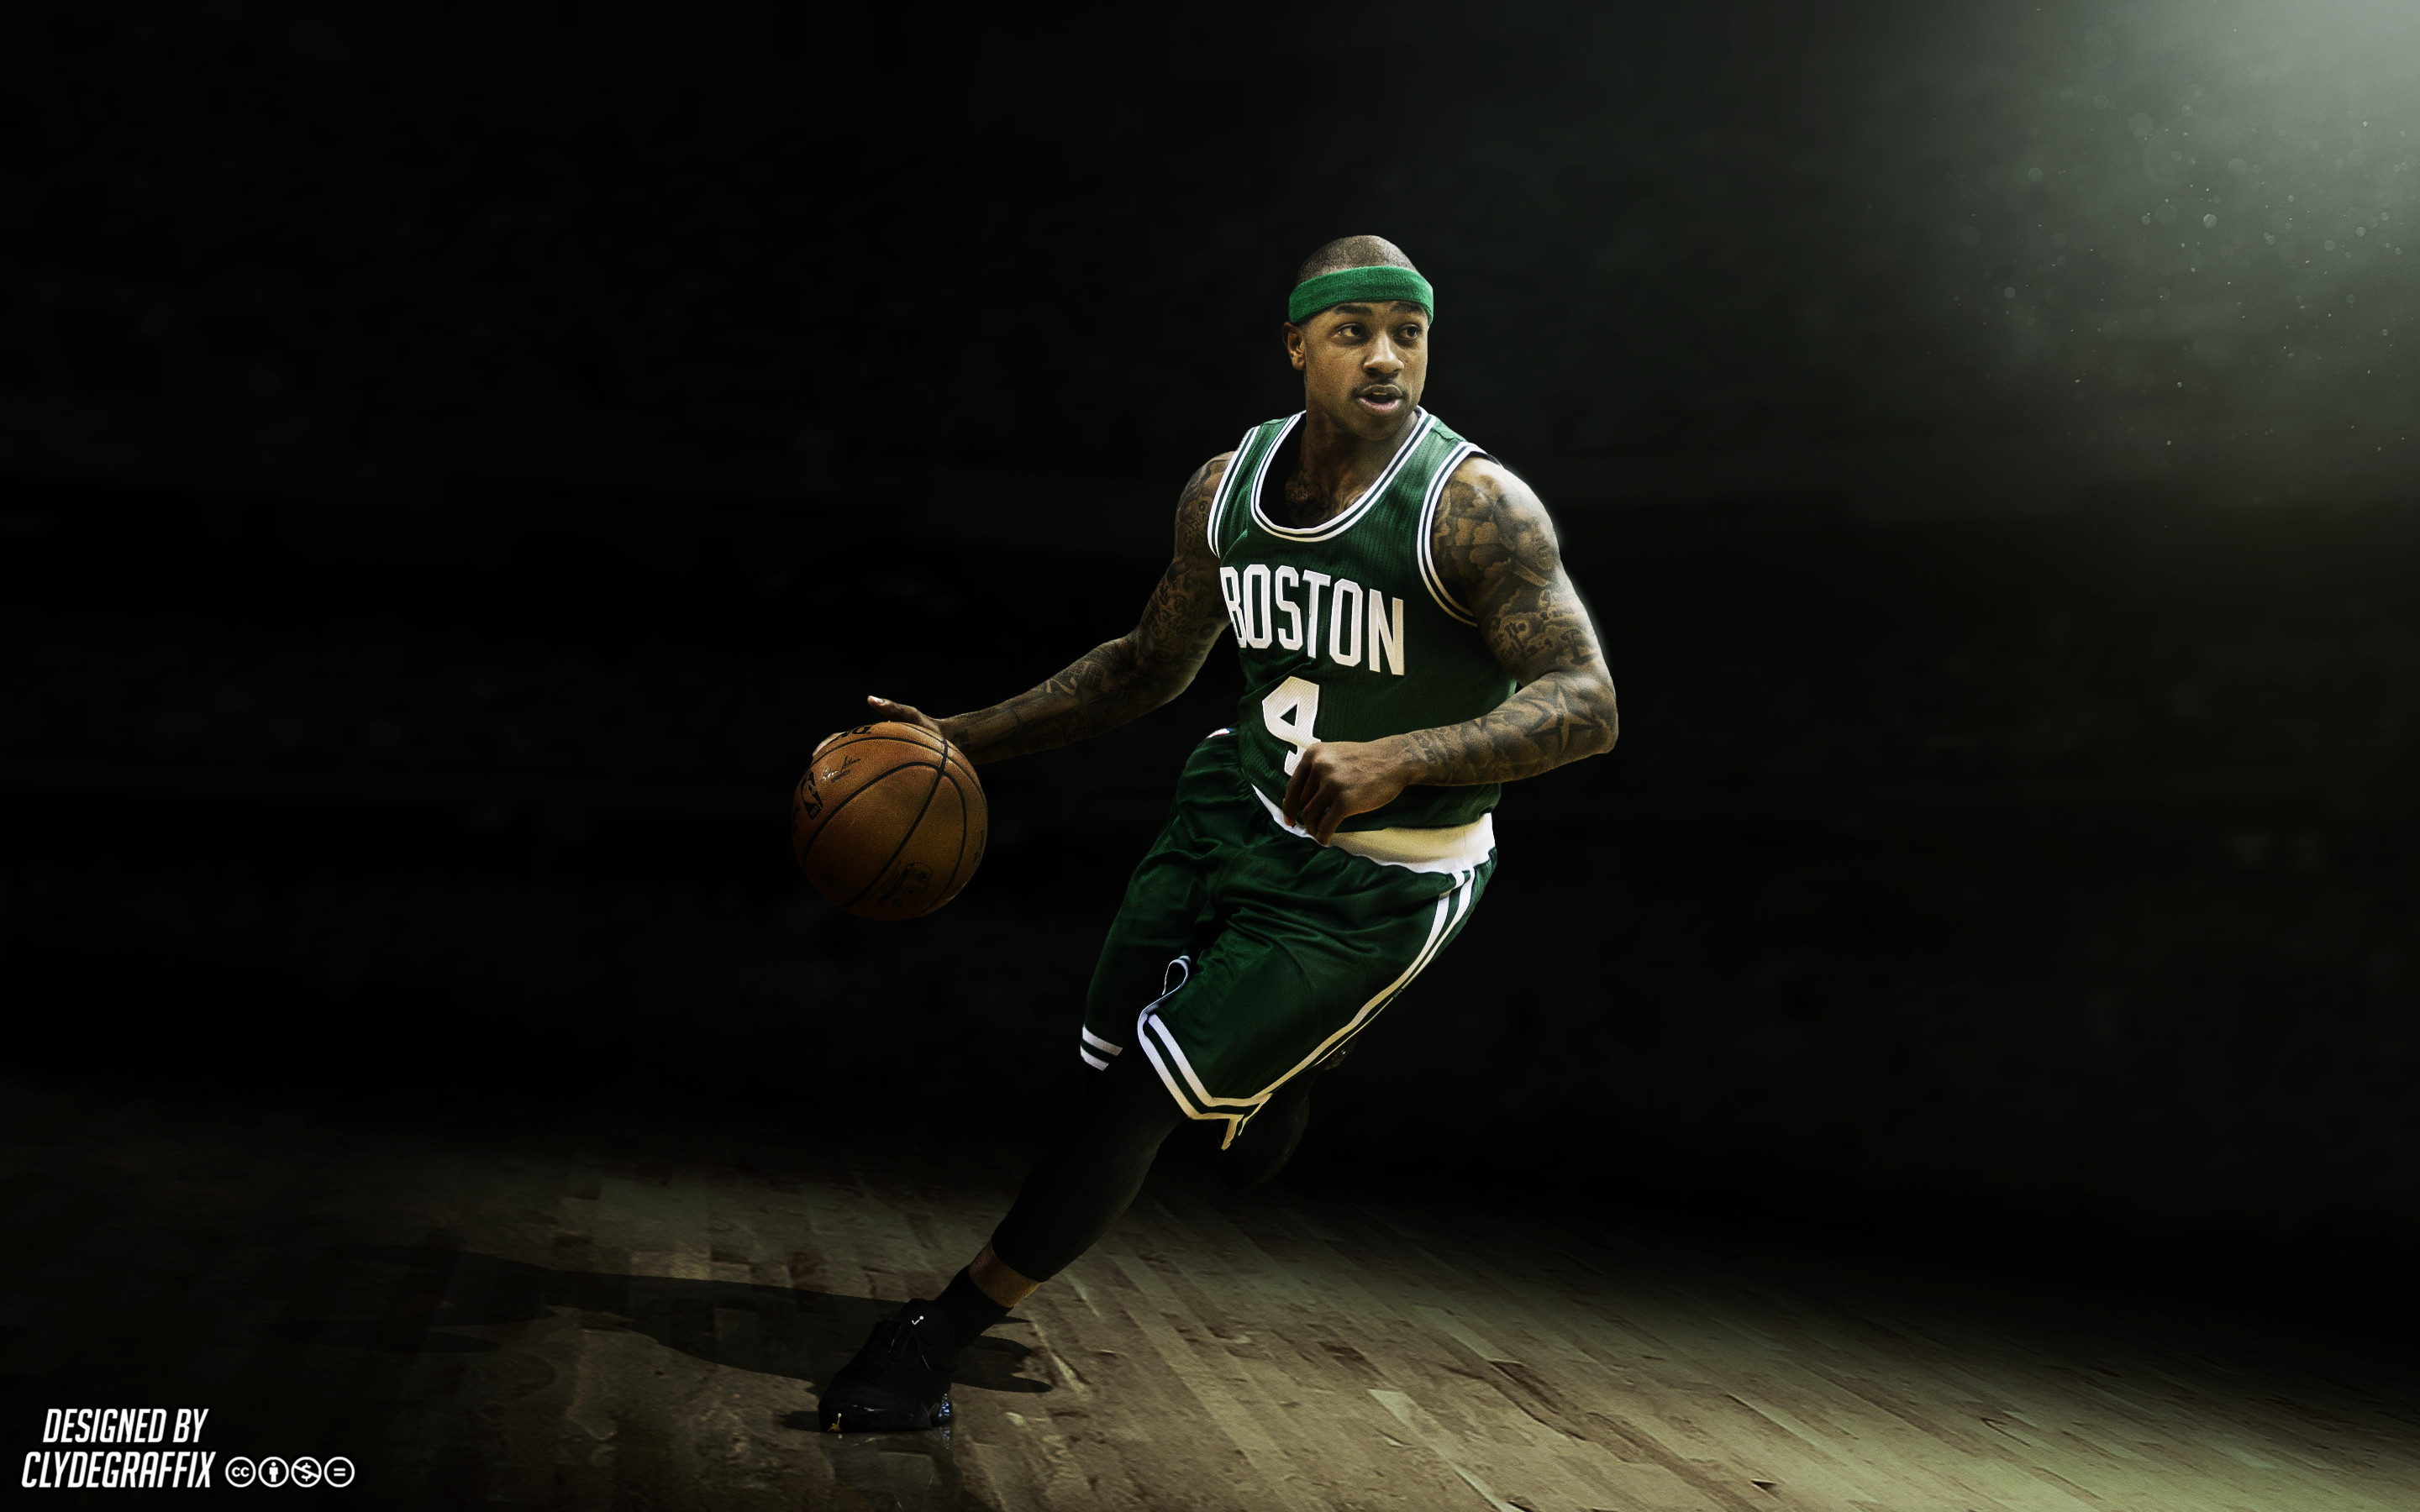 2880x1800 Isaiah Thomas Wallpaper Celtics ... have one of my wallpapers all wallpapers  resolution is  enjoy .